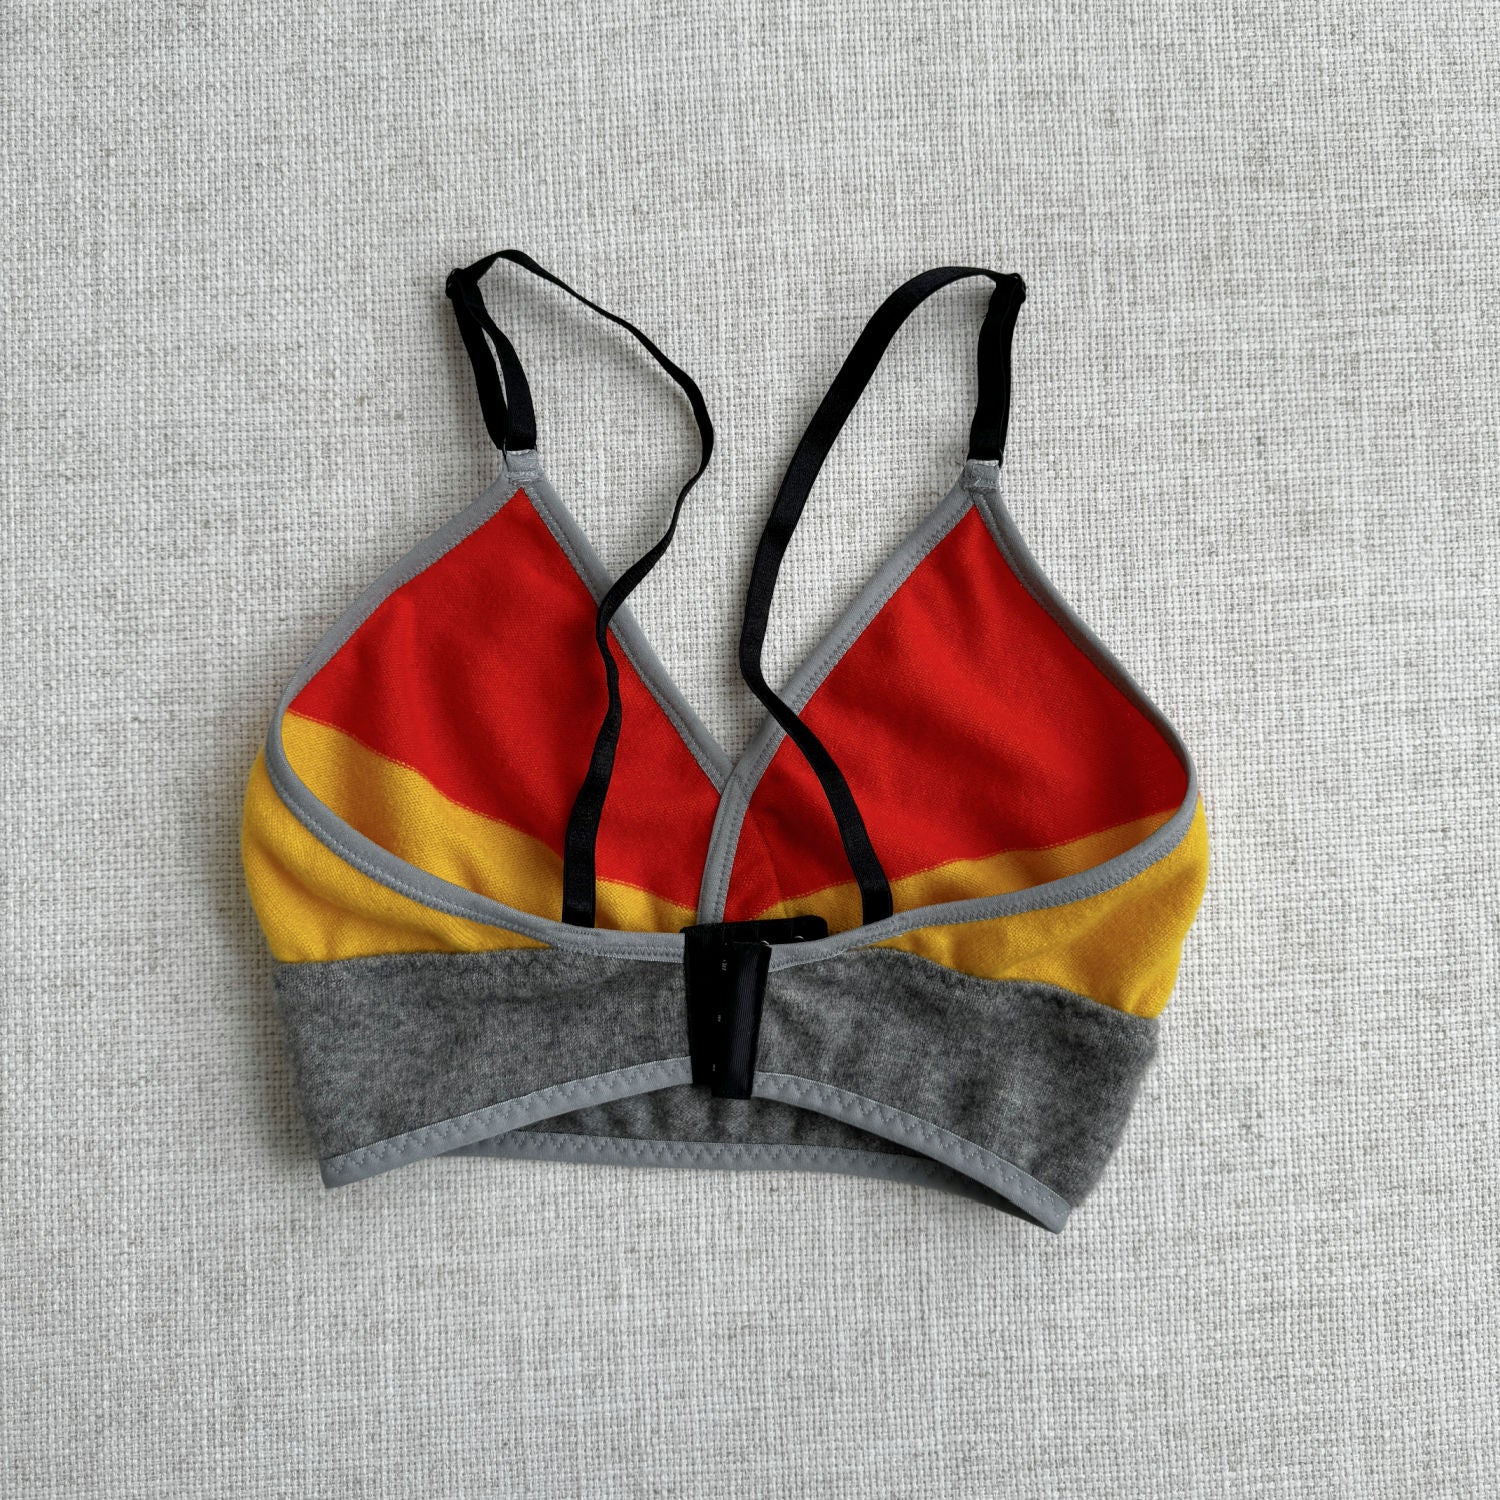 Grey, Orange, and Yellow long cashmere bra top, handmade in Canada by Econica, sumptuous cashmere fabric, bold and bright colors, soft and plush comfort, sustainable and ethical production, contemporary style, artisanal touch, luxurious loungewear, elegant simplicity